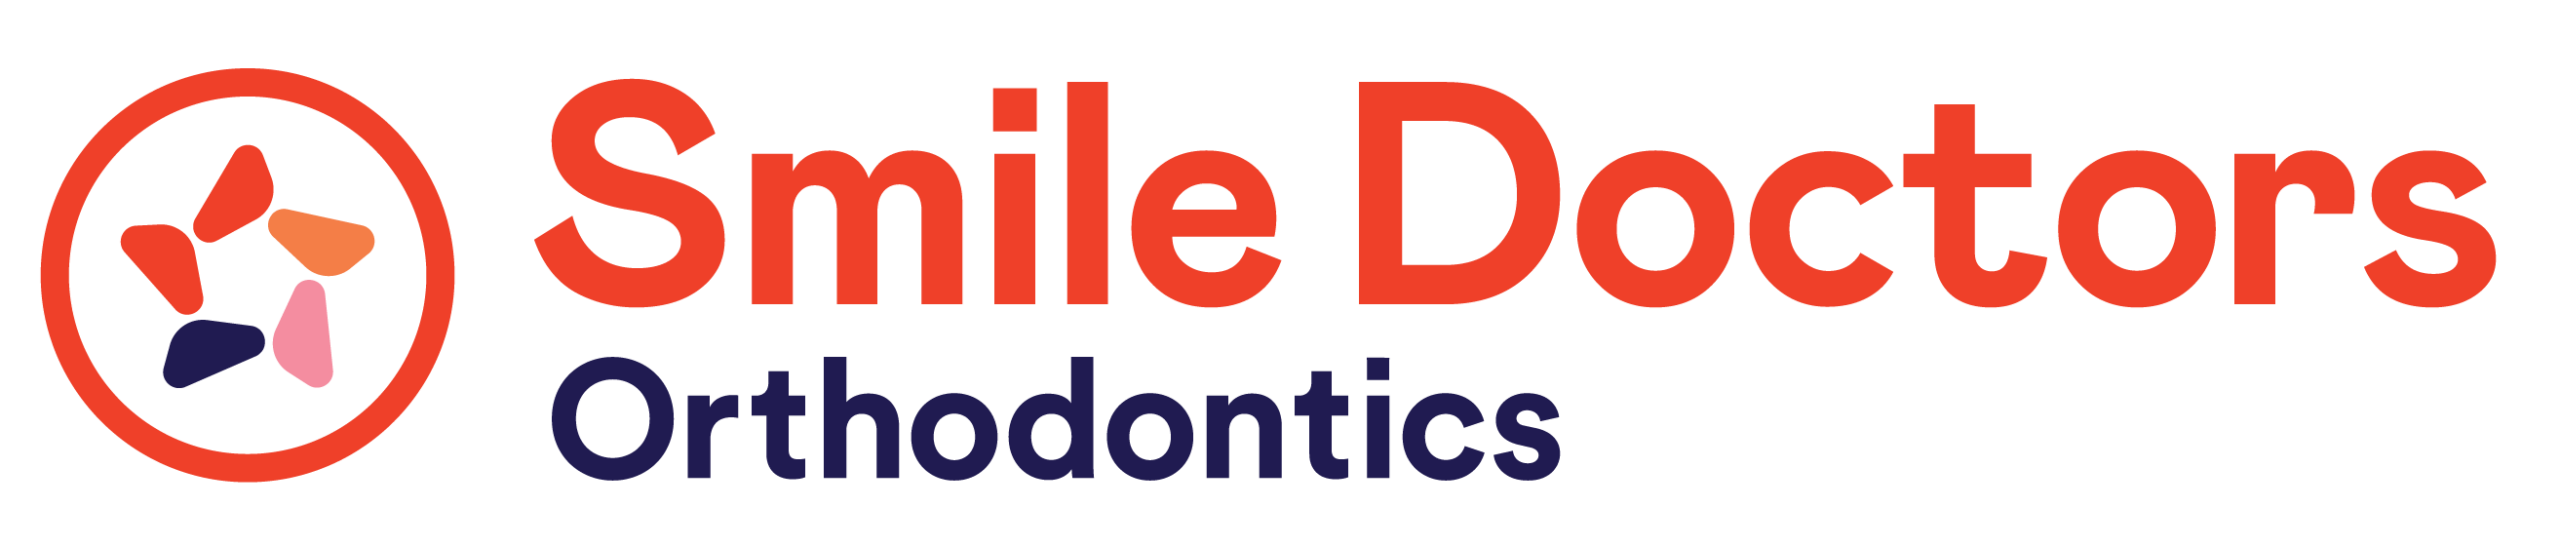 Smile Doctors Affiliates with 9 New Practices in Q2 2021, Including the 1st in Maryland